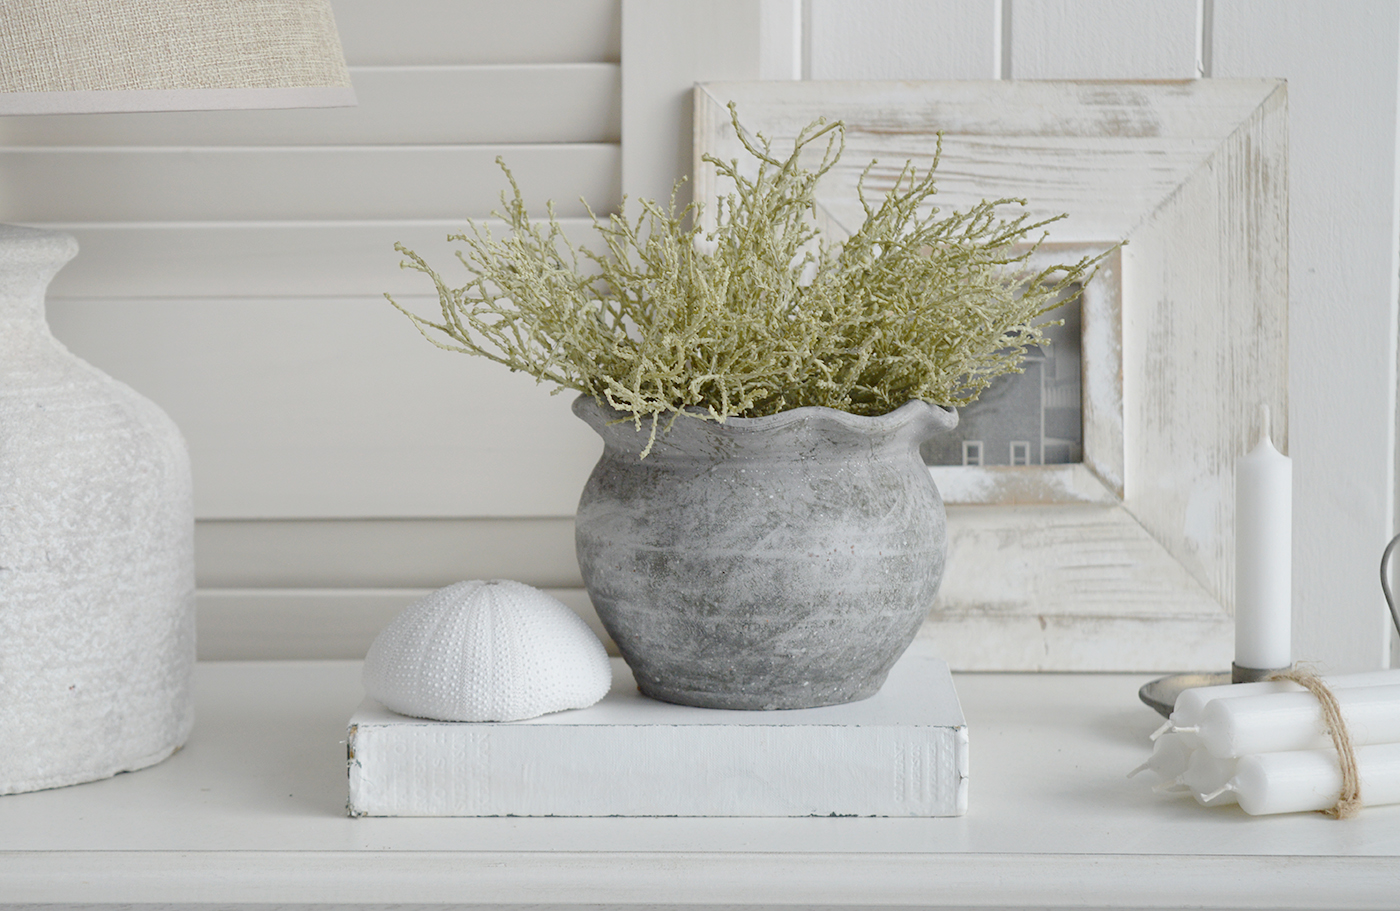 The Meredith stone pots, a grey pot iwht a fluted top to stel your coastal inspired home New England style